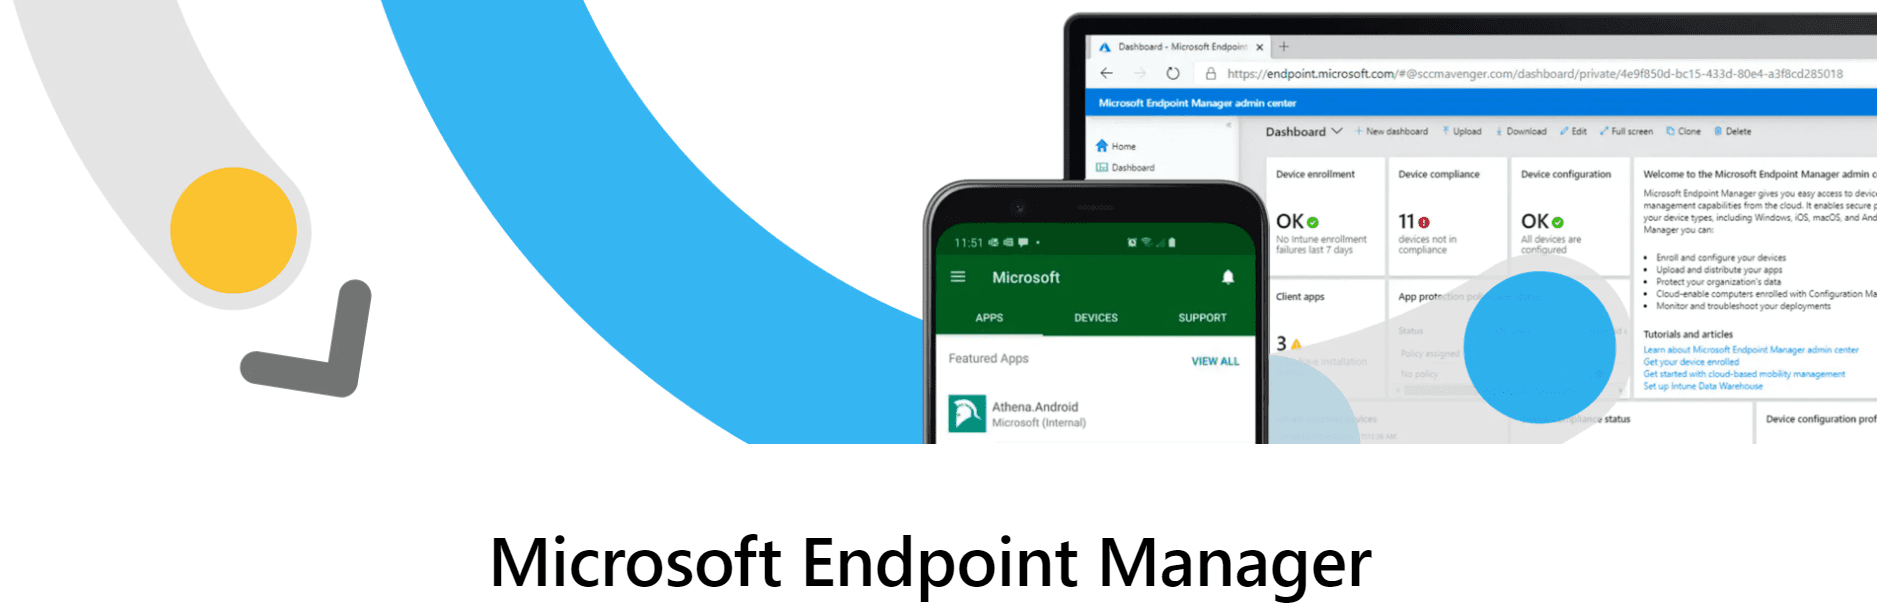 Microsoft EndPoint Manager